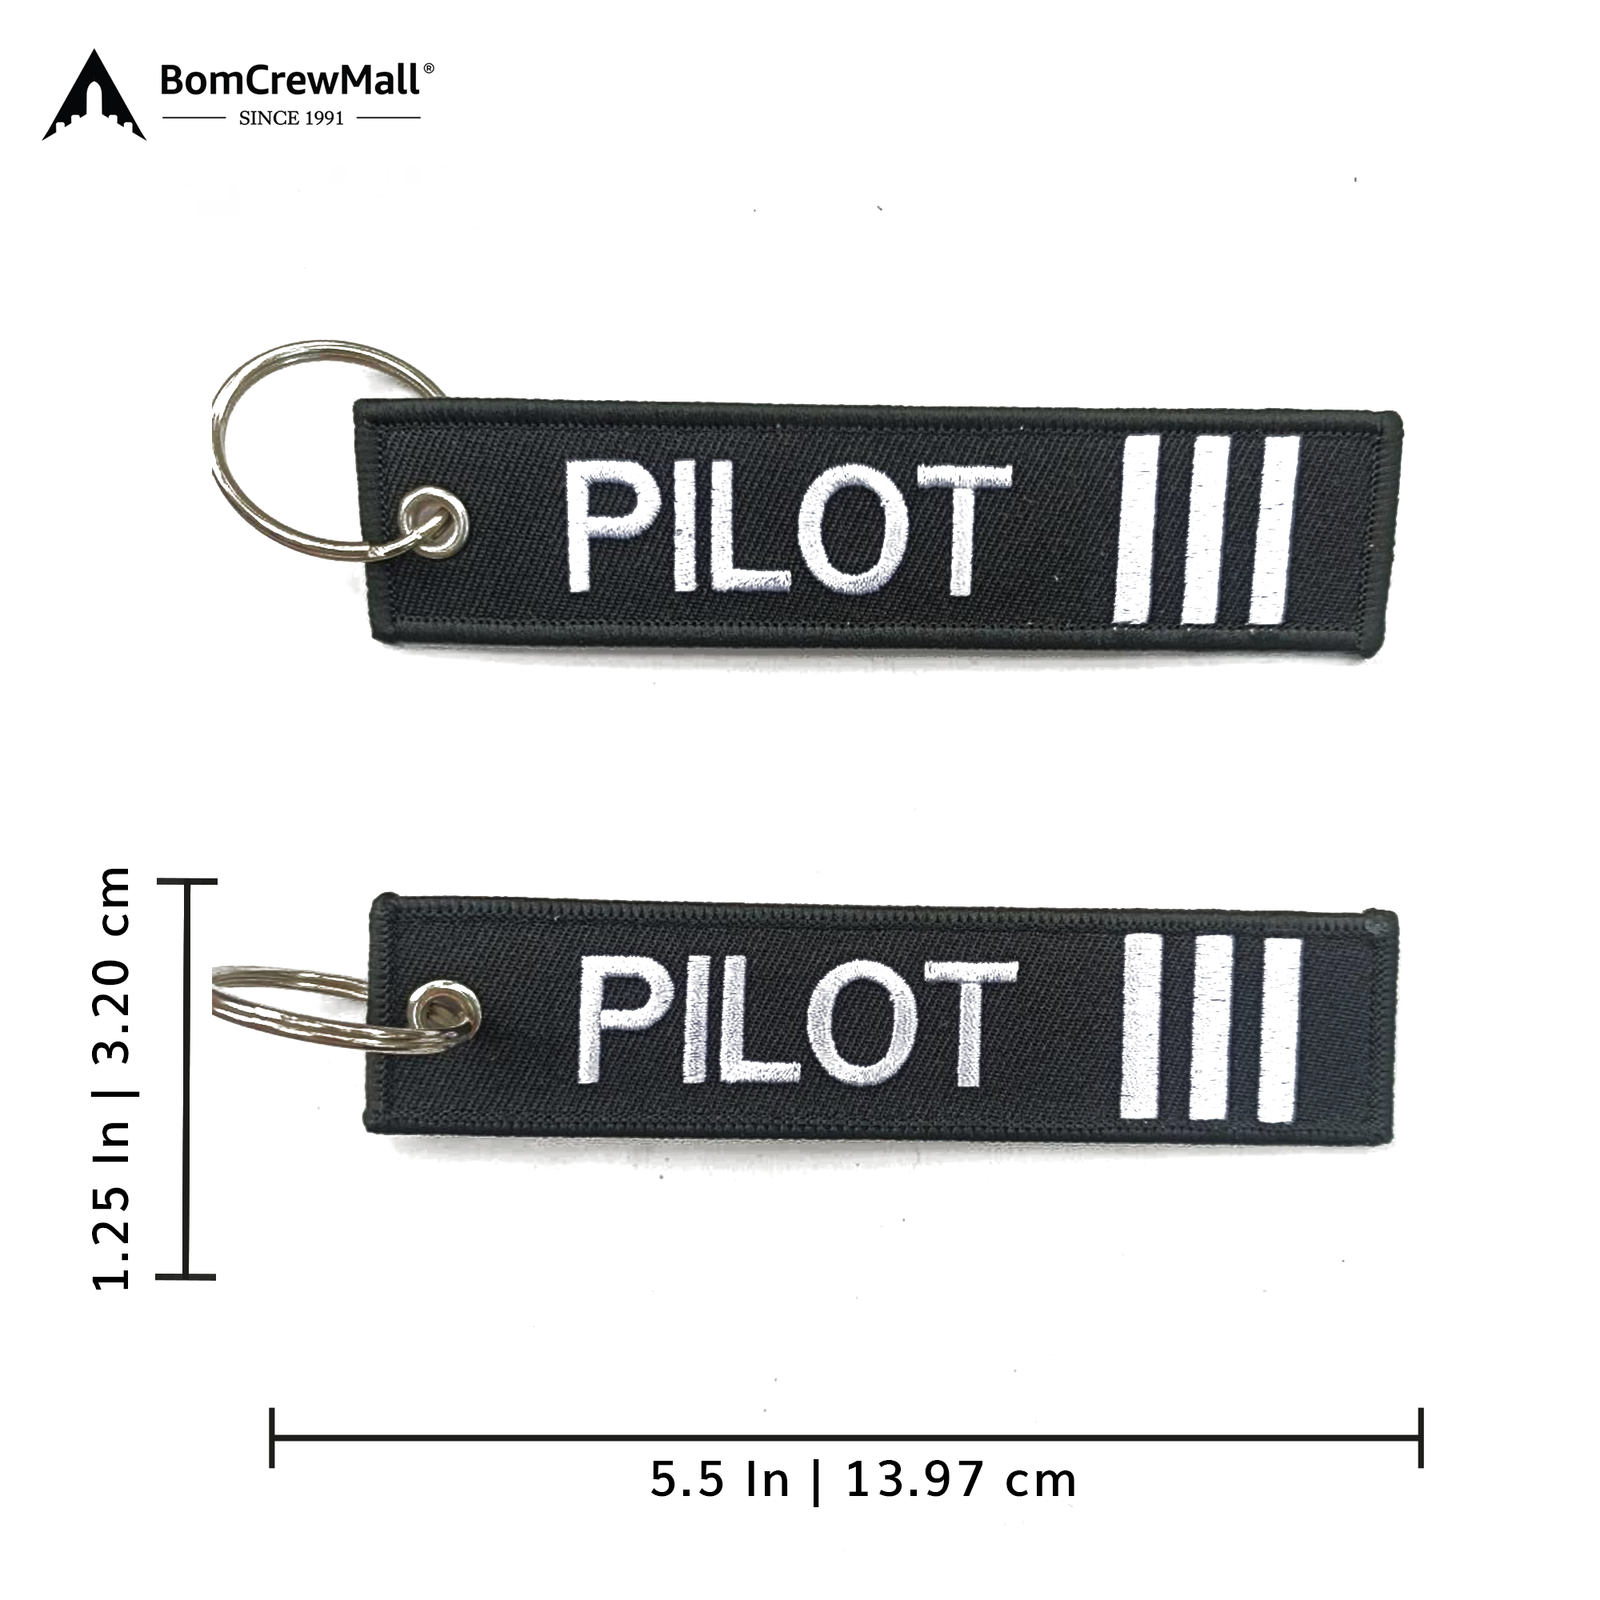 18R 36L EMBROIDERY BAG TAG with Pilot written on it.